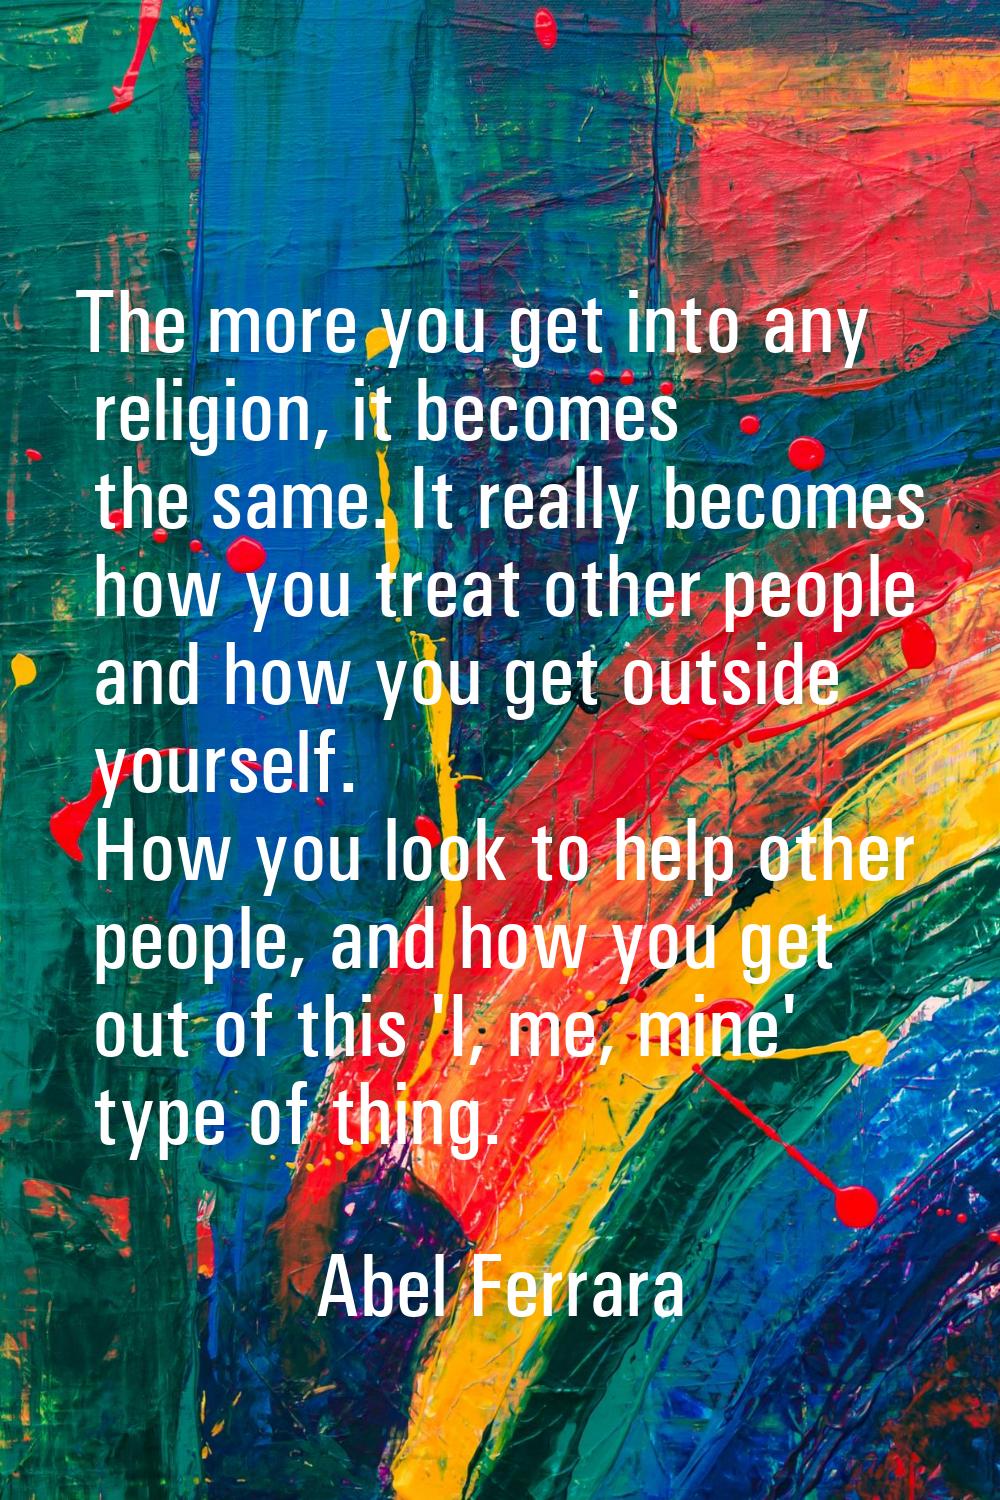 The more you get into any religion, it becomes the same. It really becomes how you treat other peop